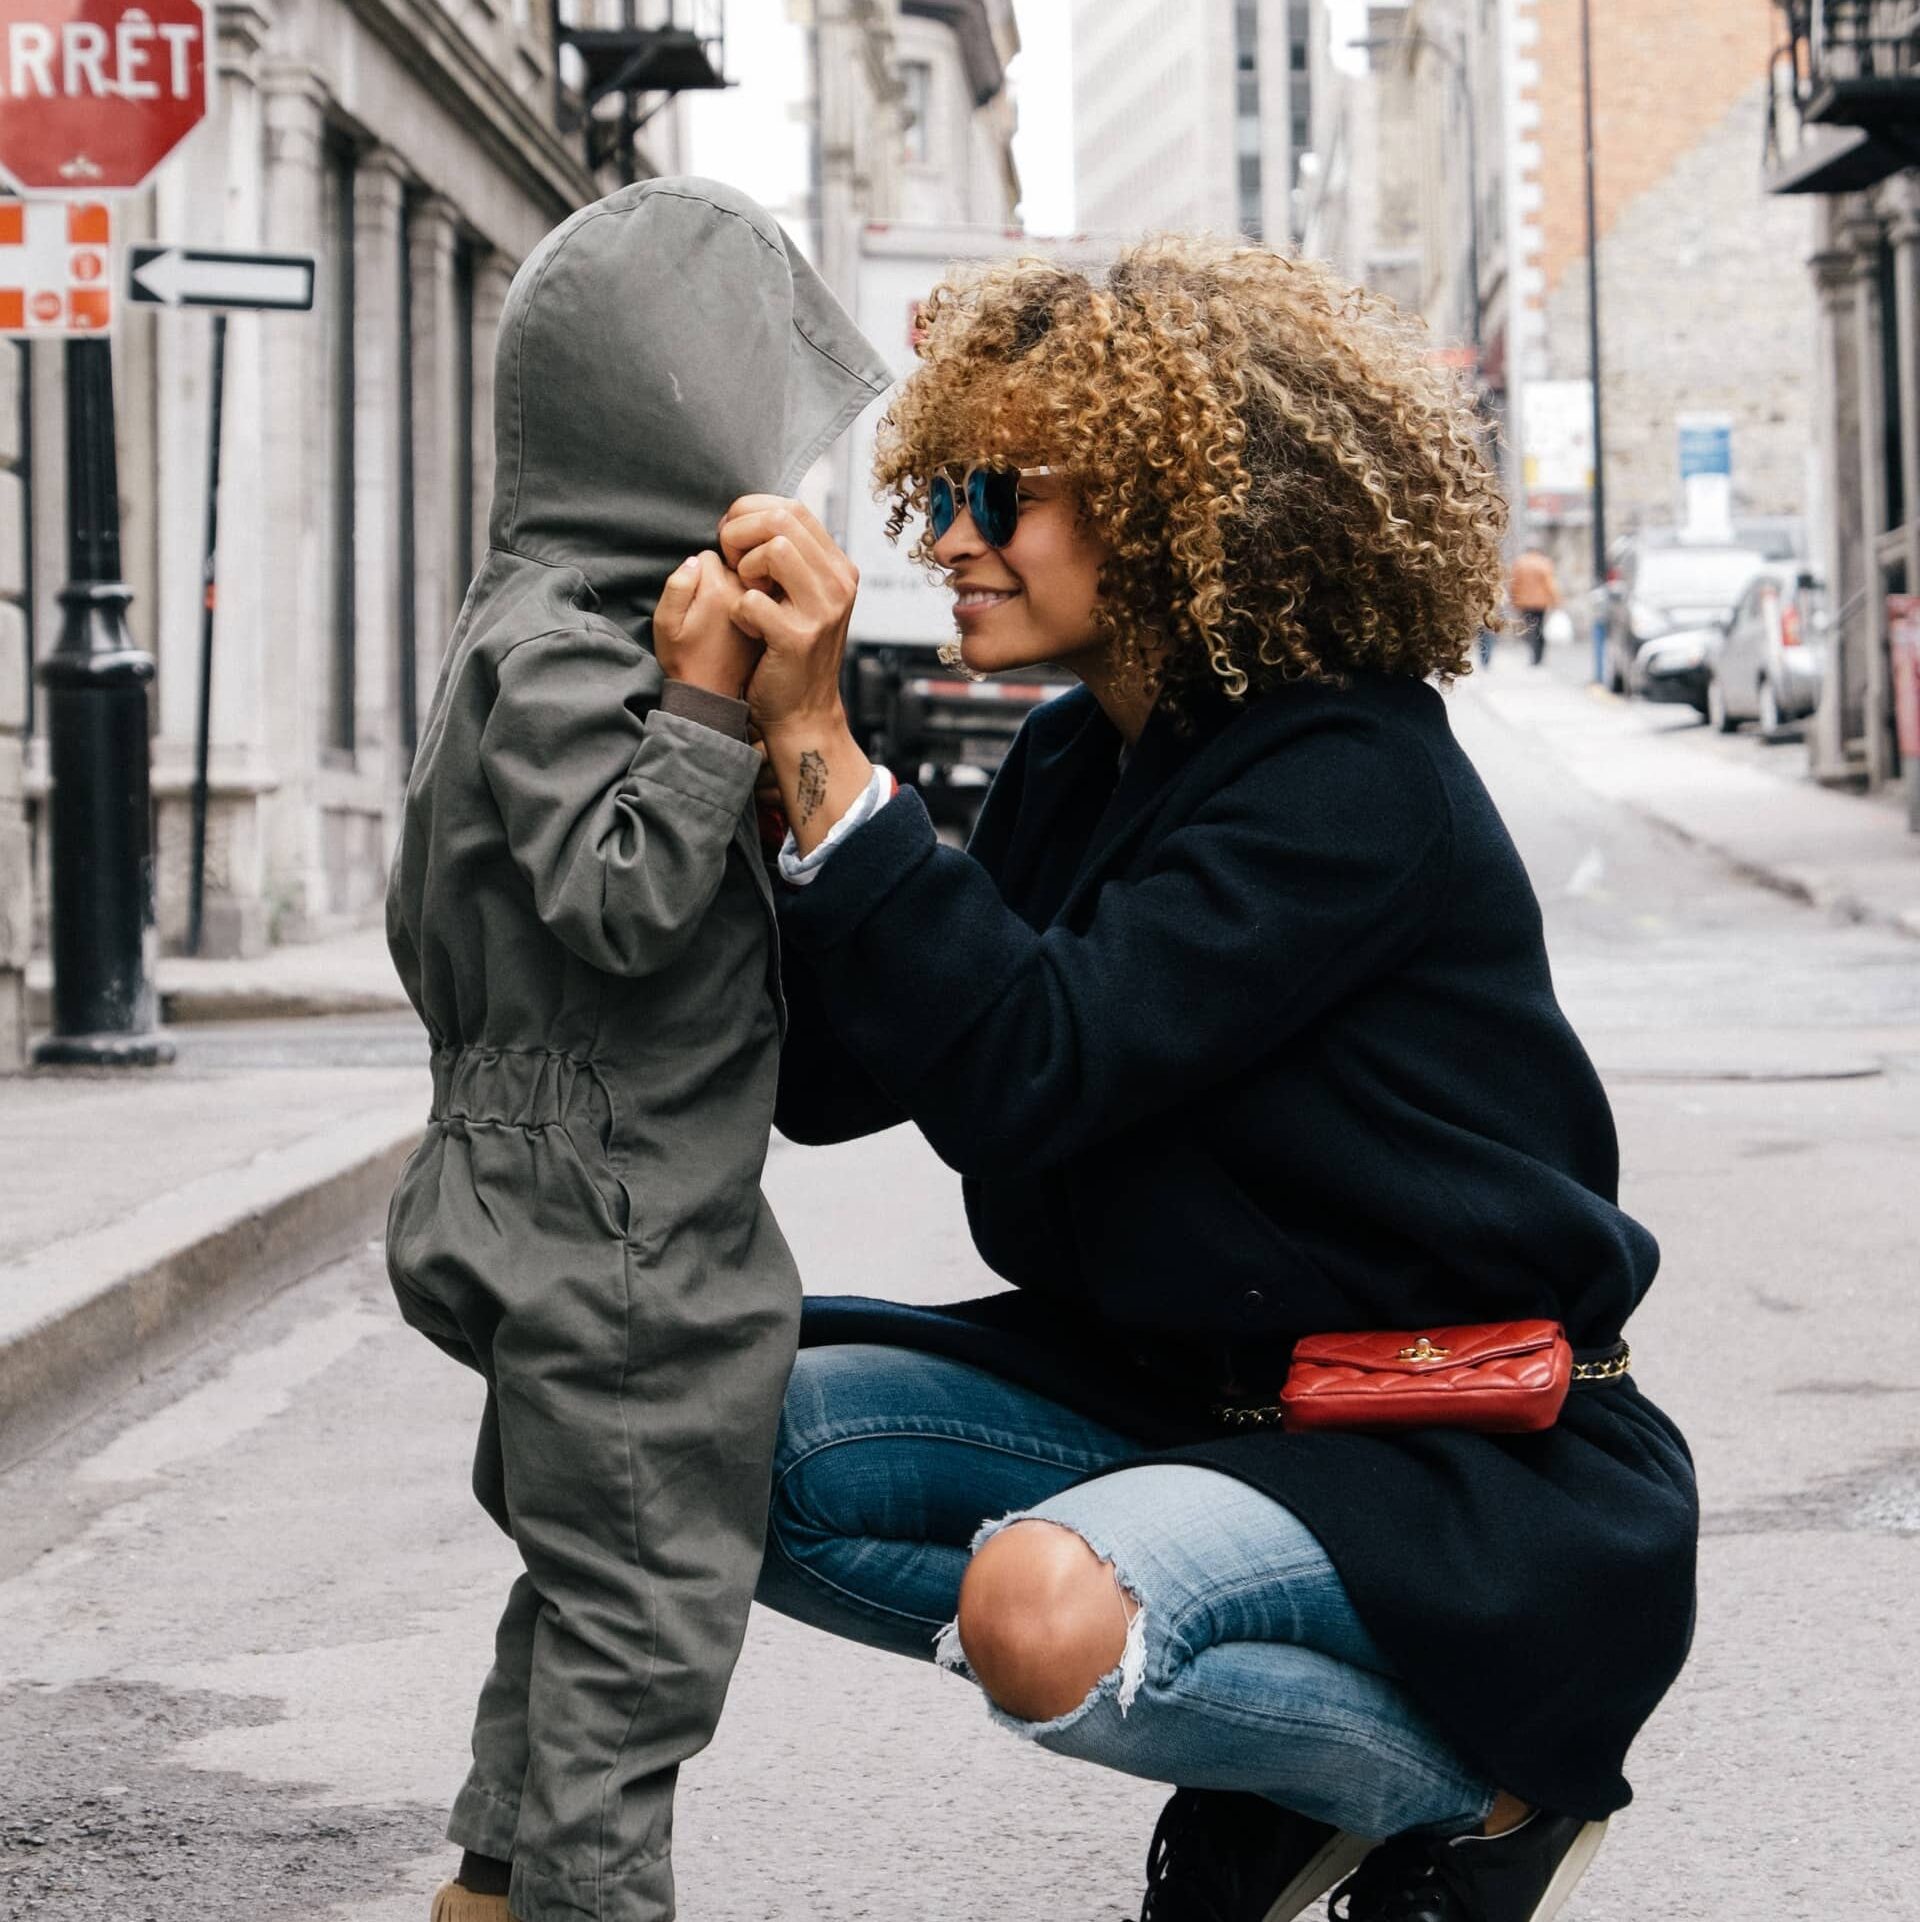 Find au pair job and register with Nina.care and roam the streets of New York like this fashionable woman with cute kid